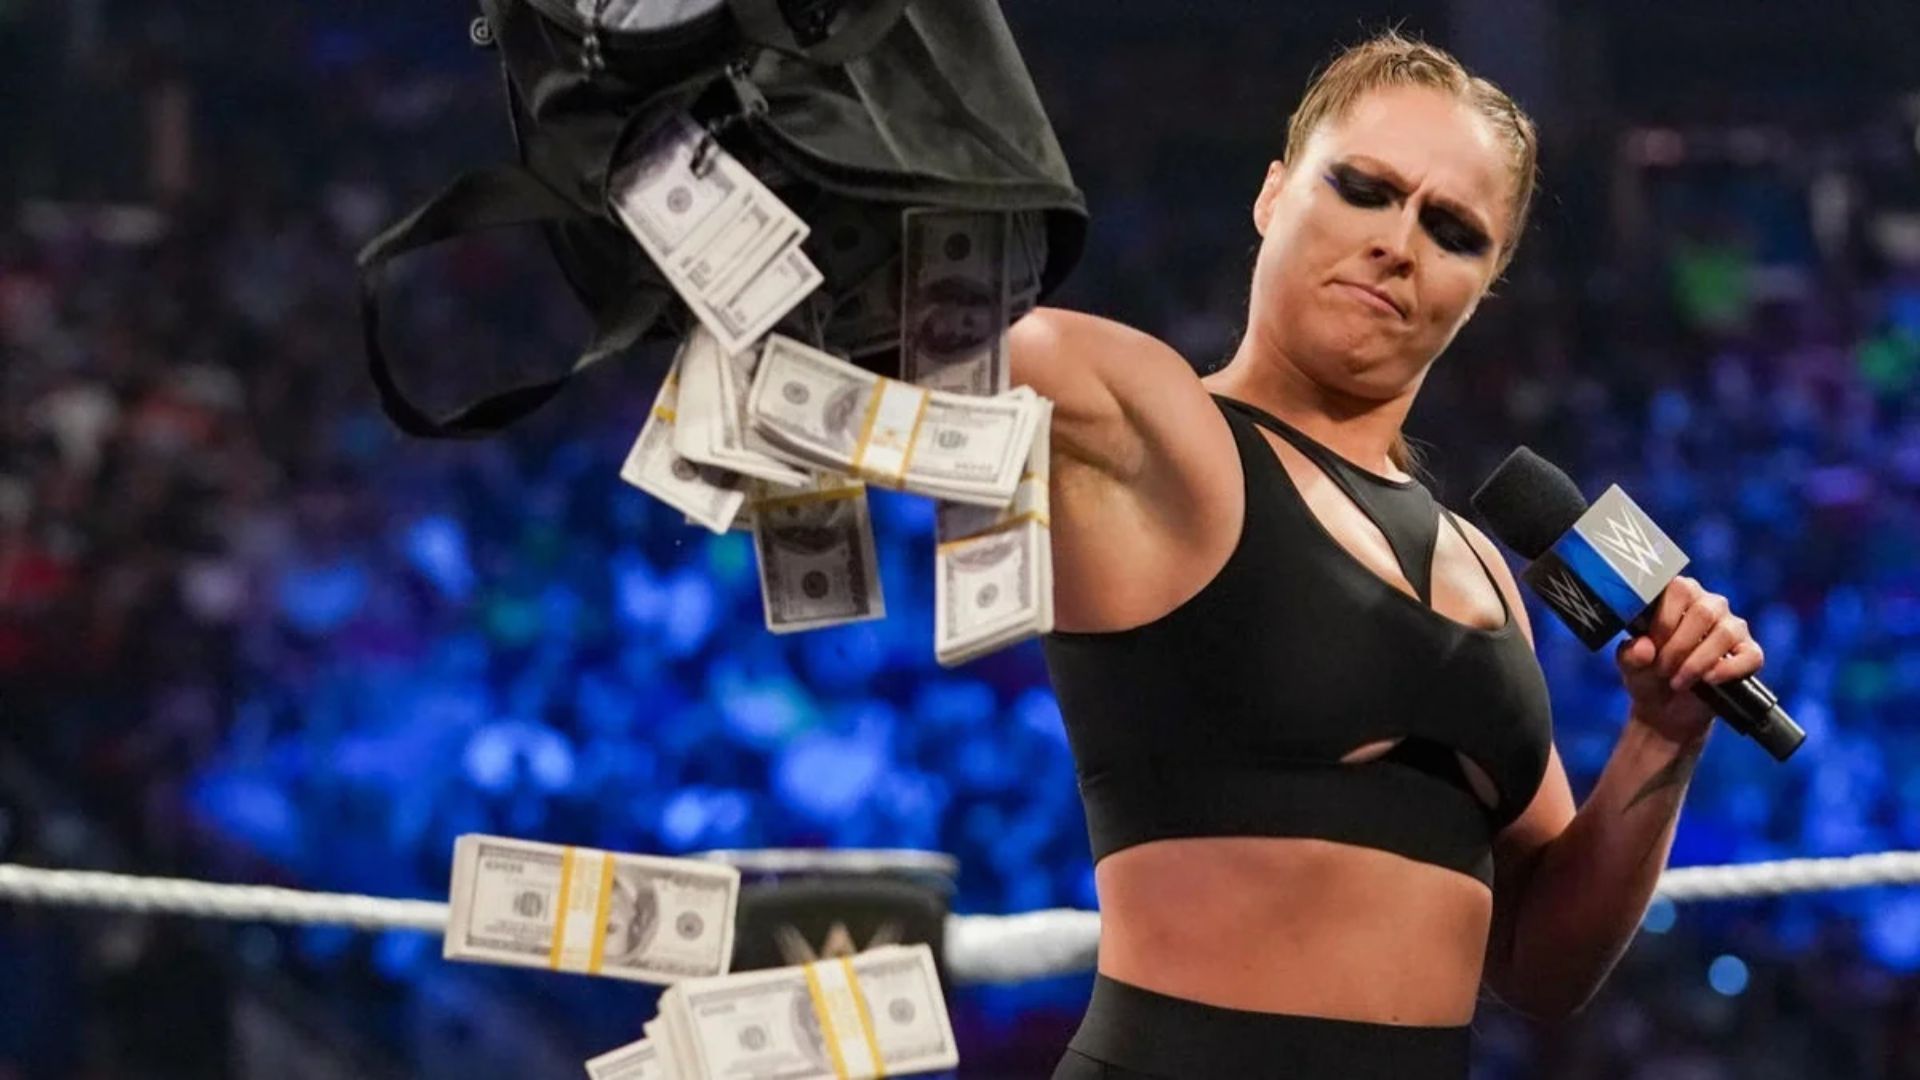 Ronda Rousey has been feuding with WWE authority for quite some time now